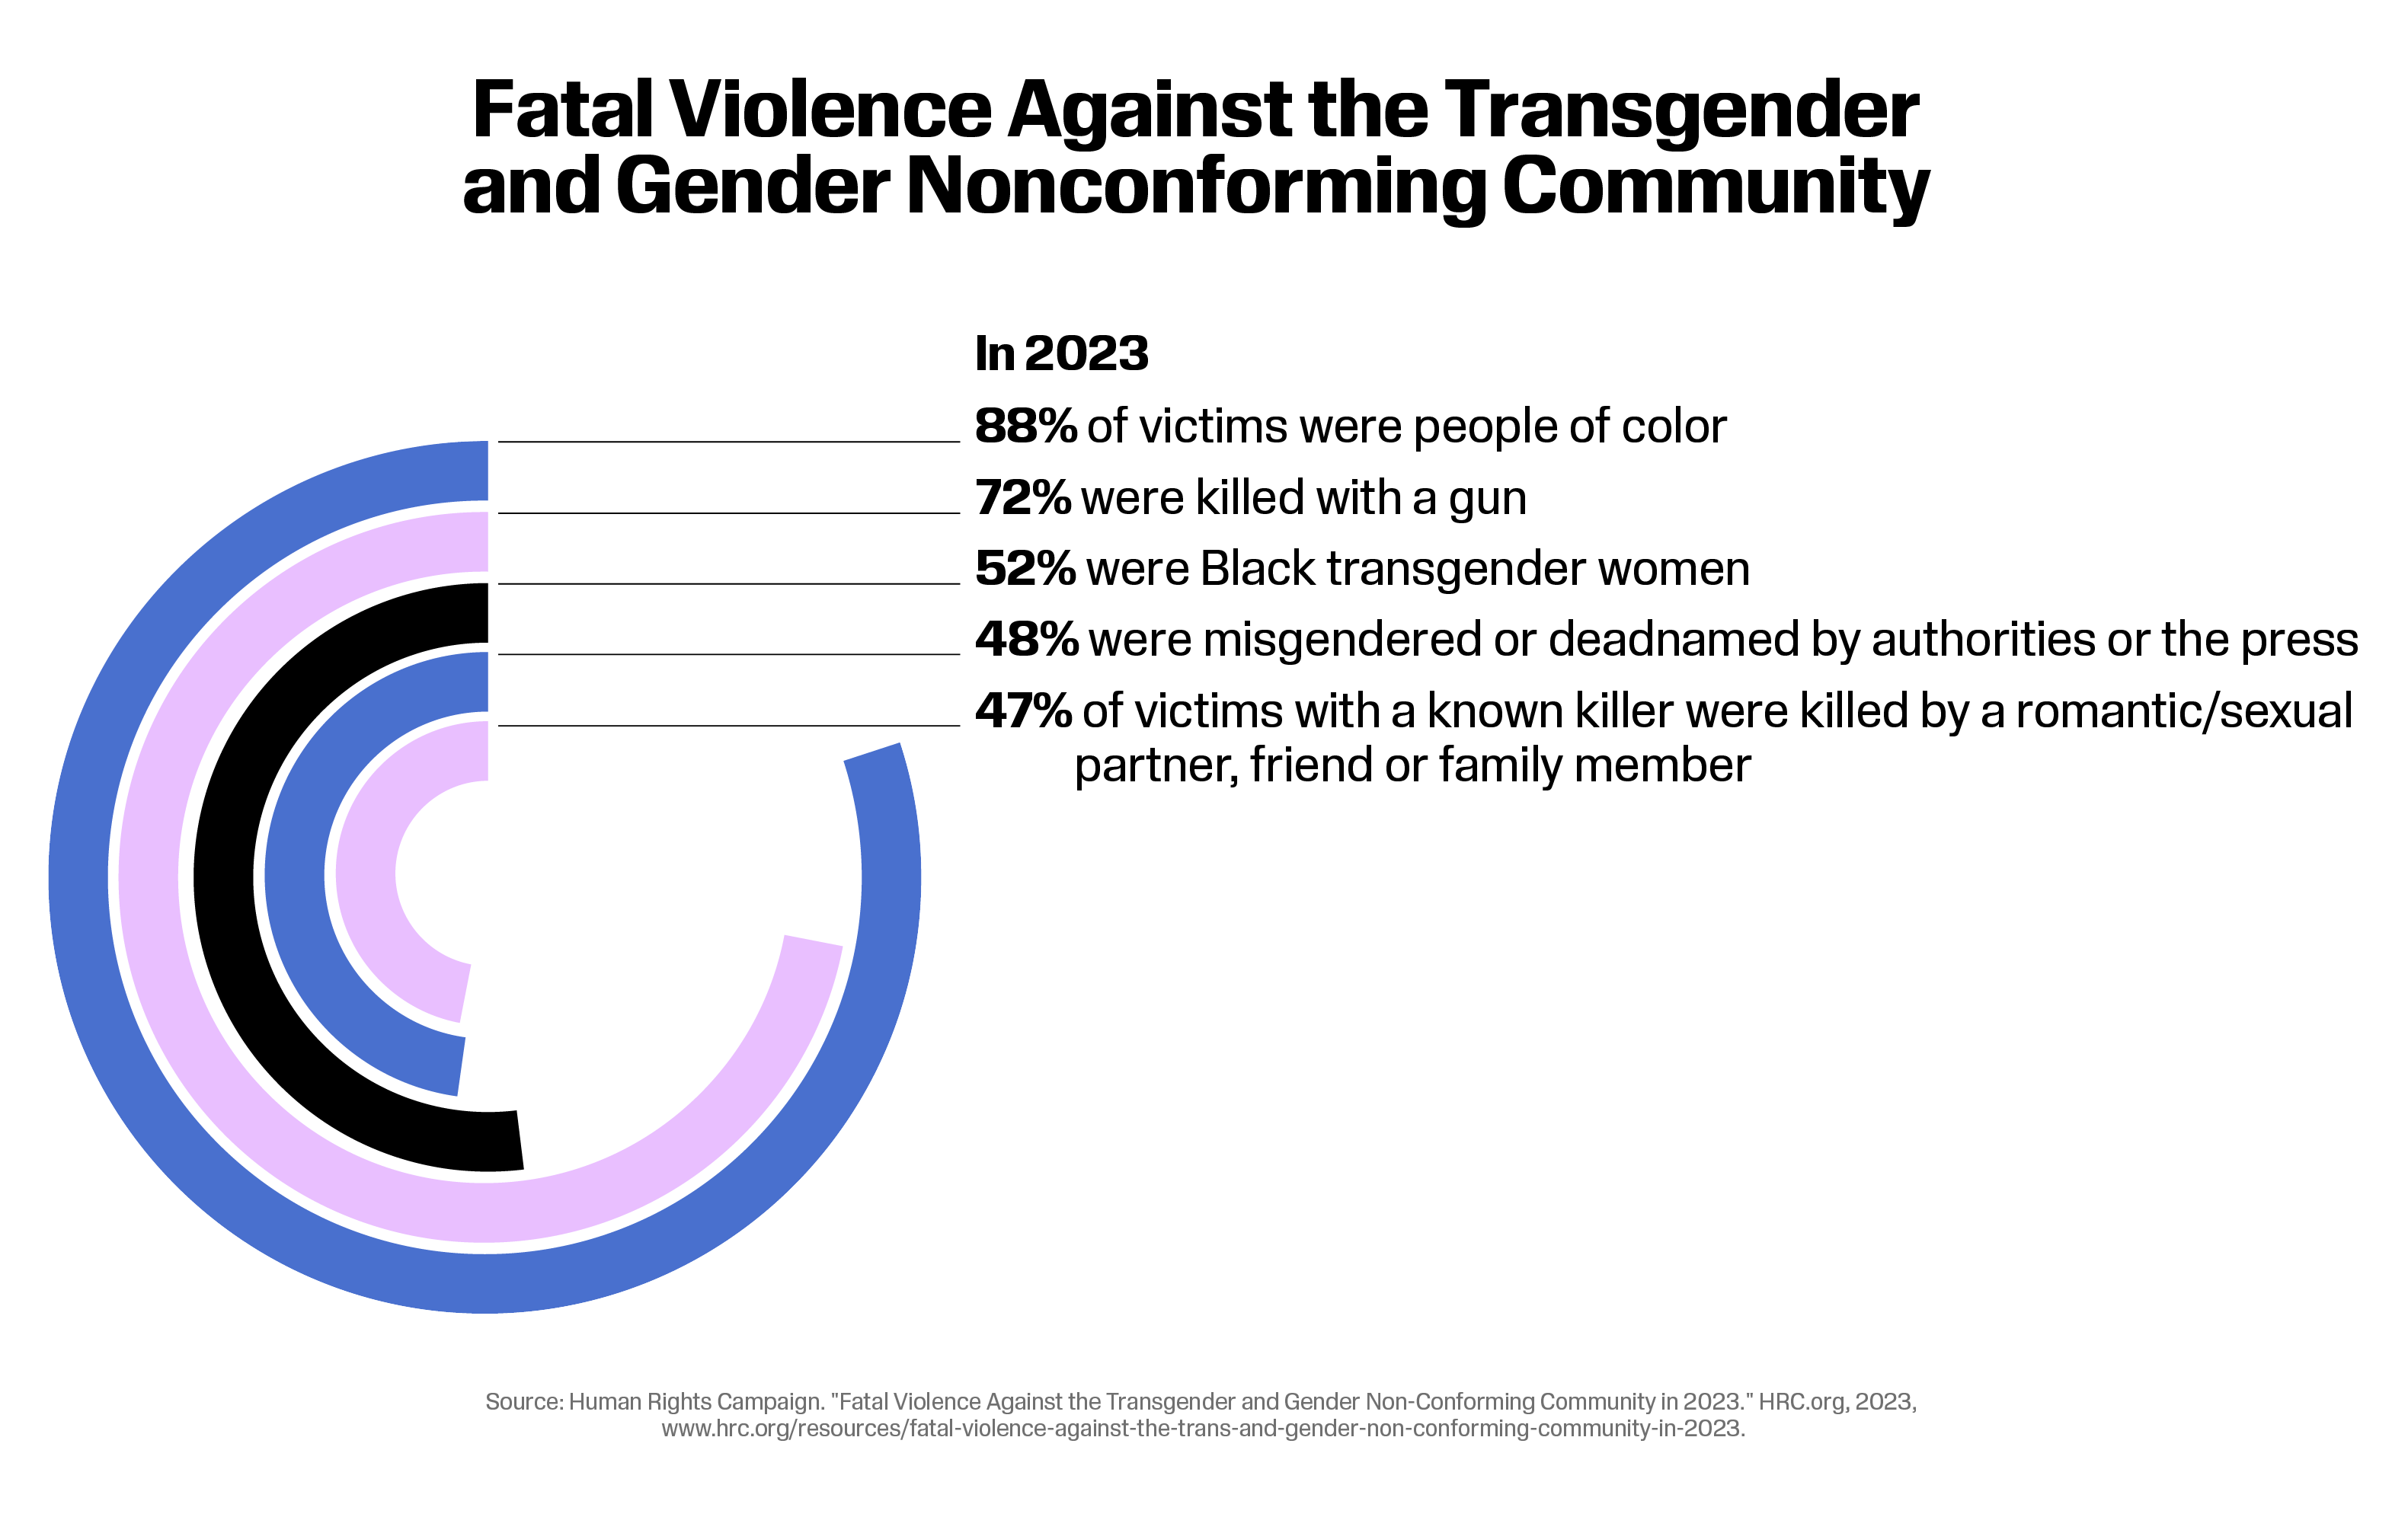 Graphic showing fatal acts of violence against transgender and gender non-conforming community